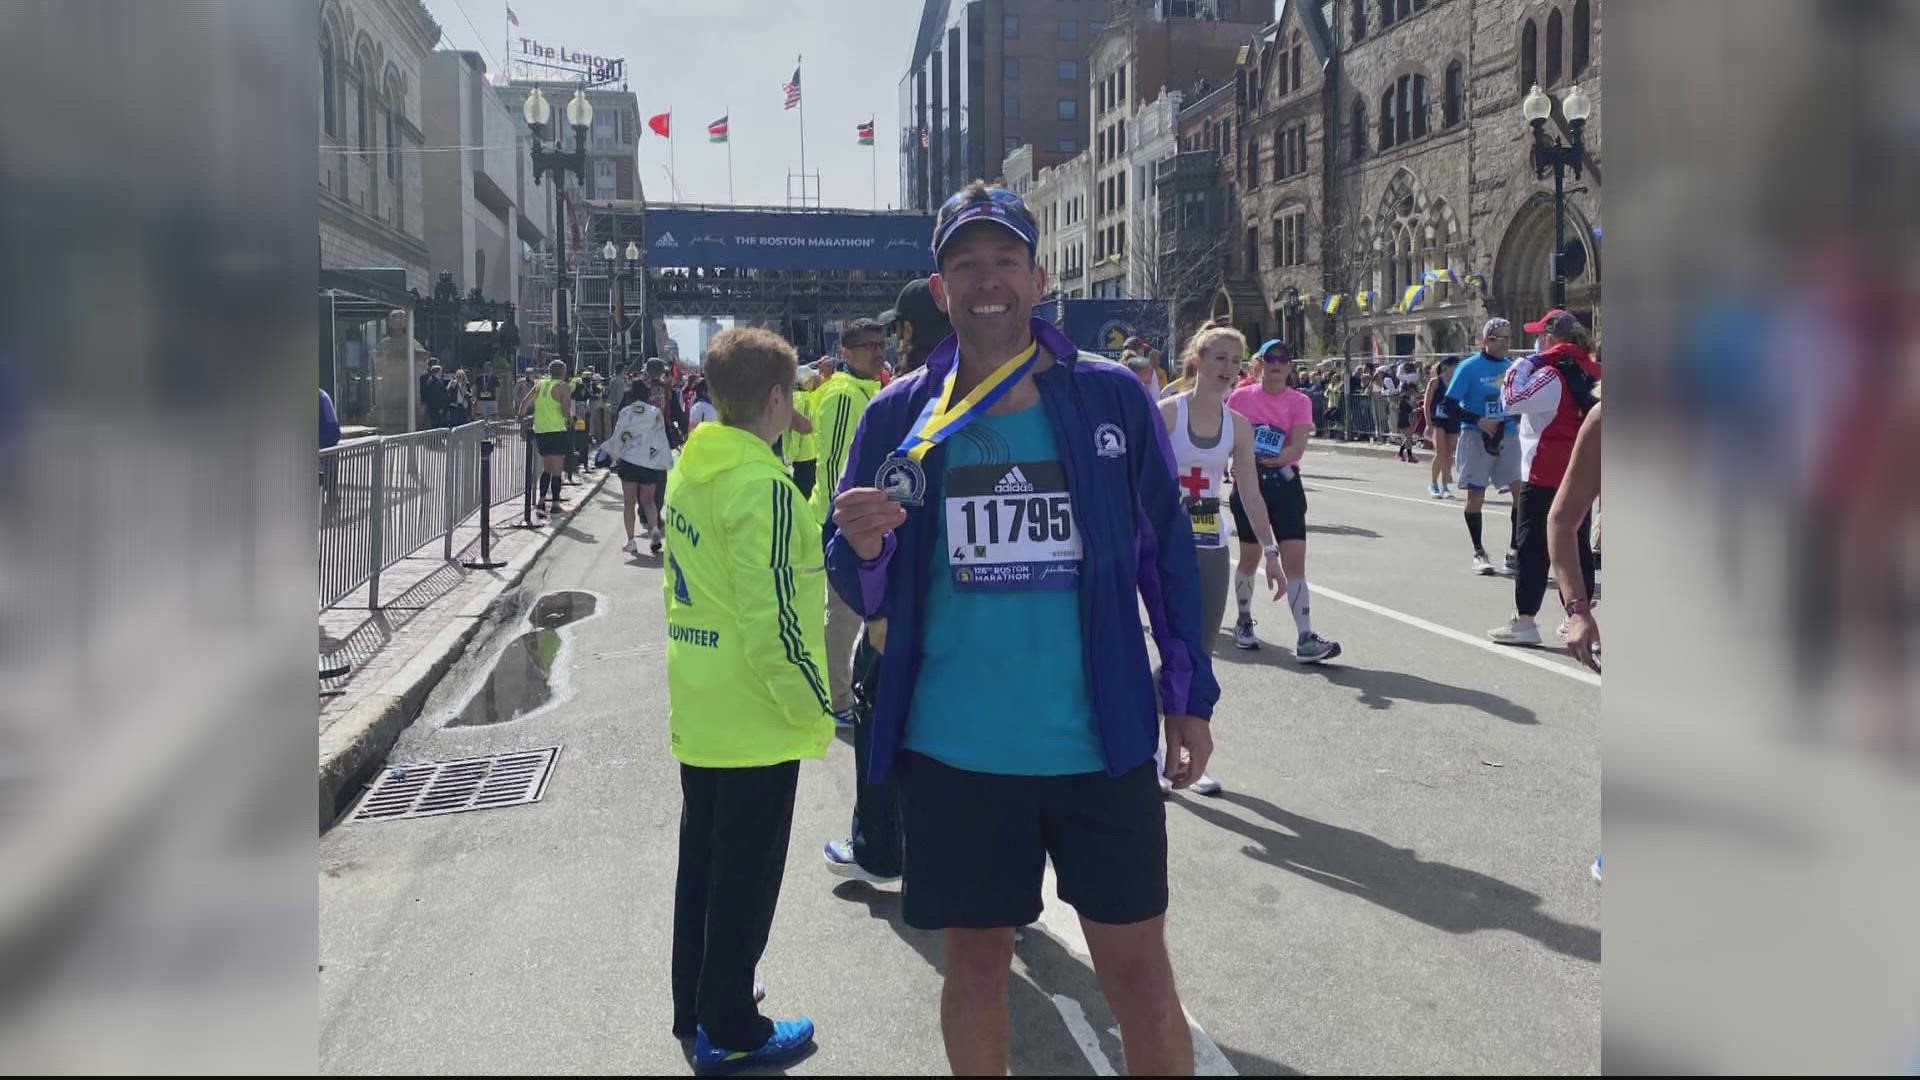 Adam Longo was one of the many participants who ran the Boston Marathon. He finished the race in 3 hours, 36 minutes, and 33 seconds.